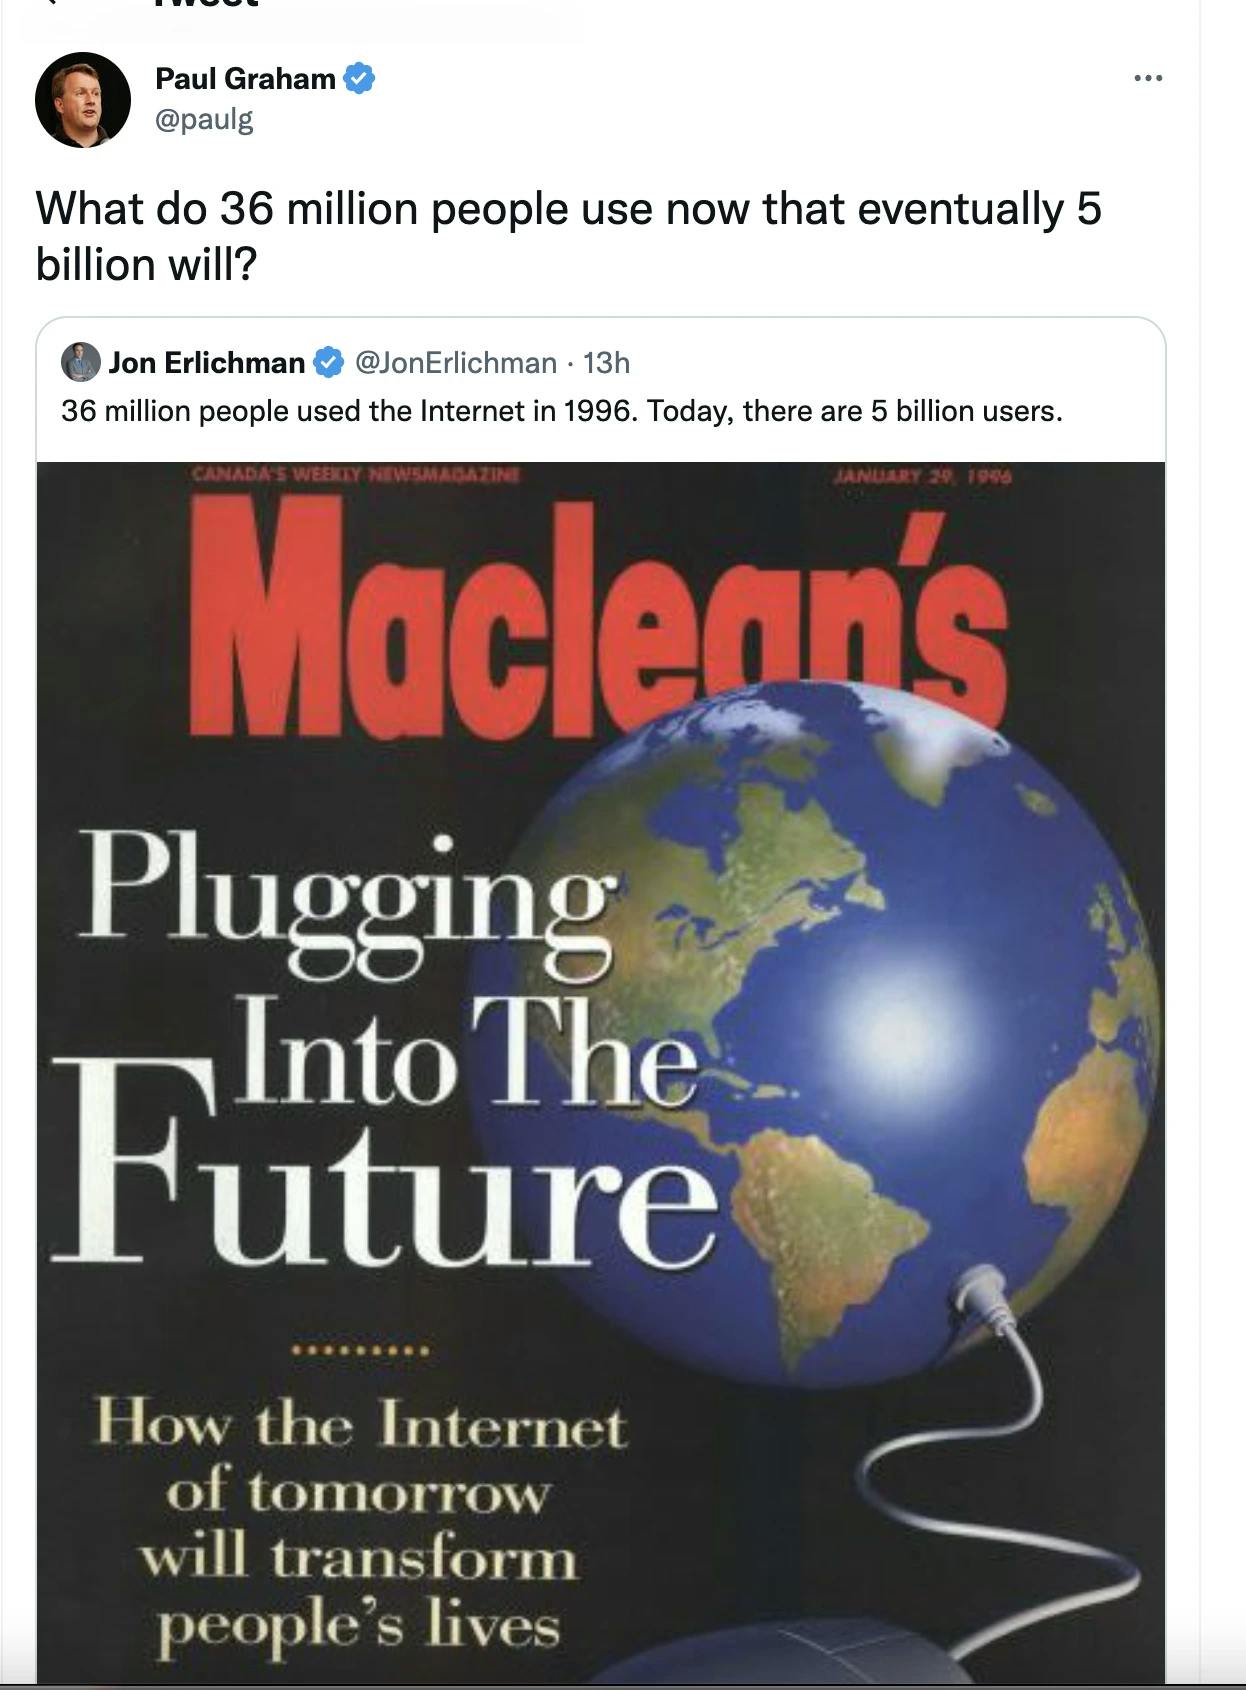 Paul Graham Twitter post "What do 36 million people use now that eventually 5 billion will?